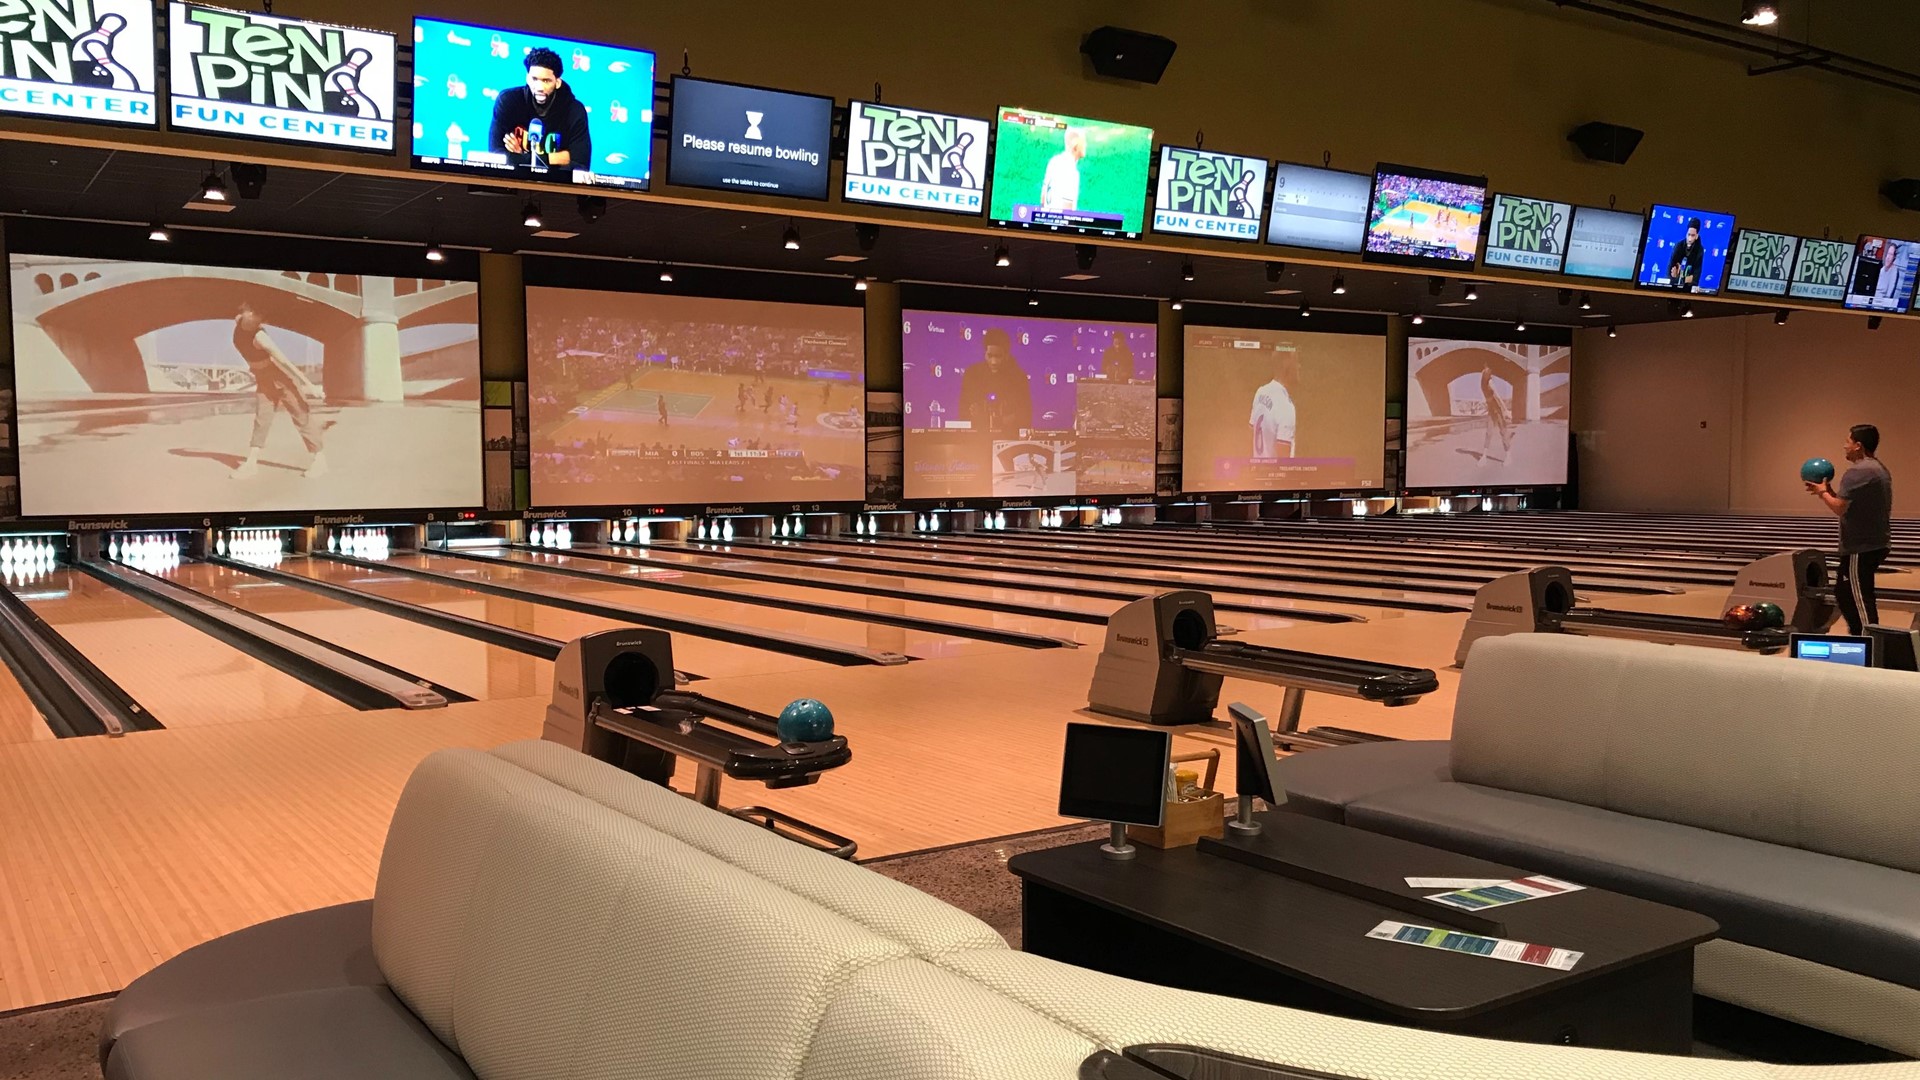 Diversity Independence in terms of Bowling alley opens in Turlock for the first time in nearly 20 years |  abc10.com